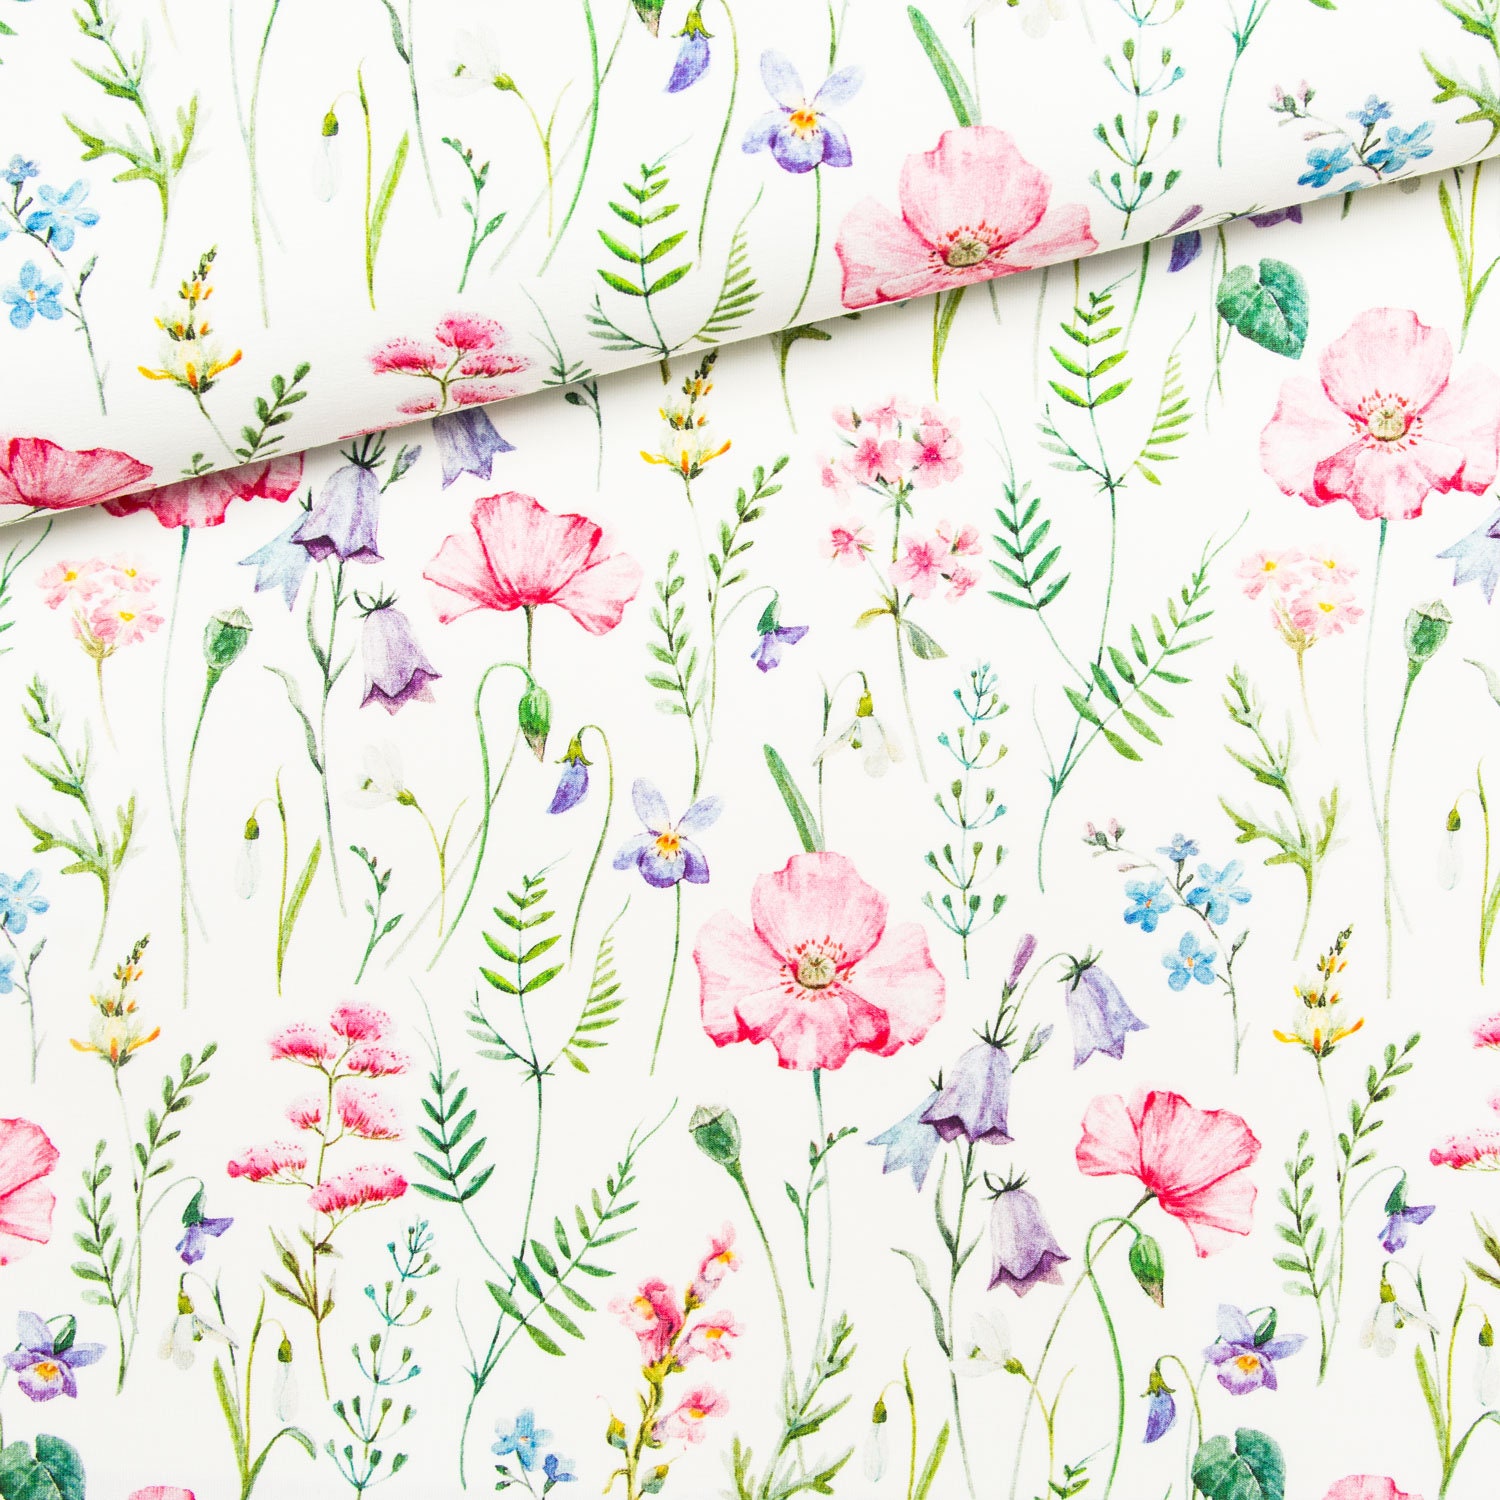 SMALL FLOWER Pattern cotton 100/% MEADOW Eco-print Printed Cotton Fabric Width 155cm 61